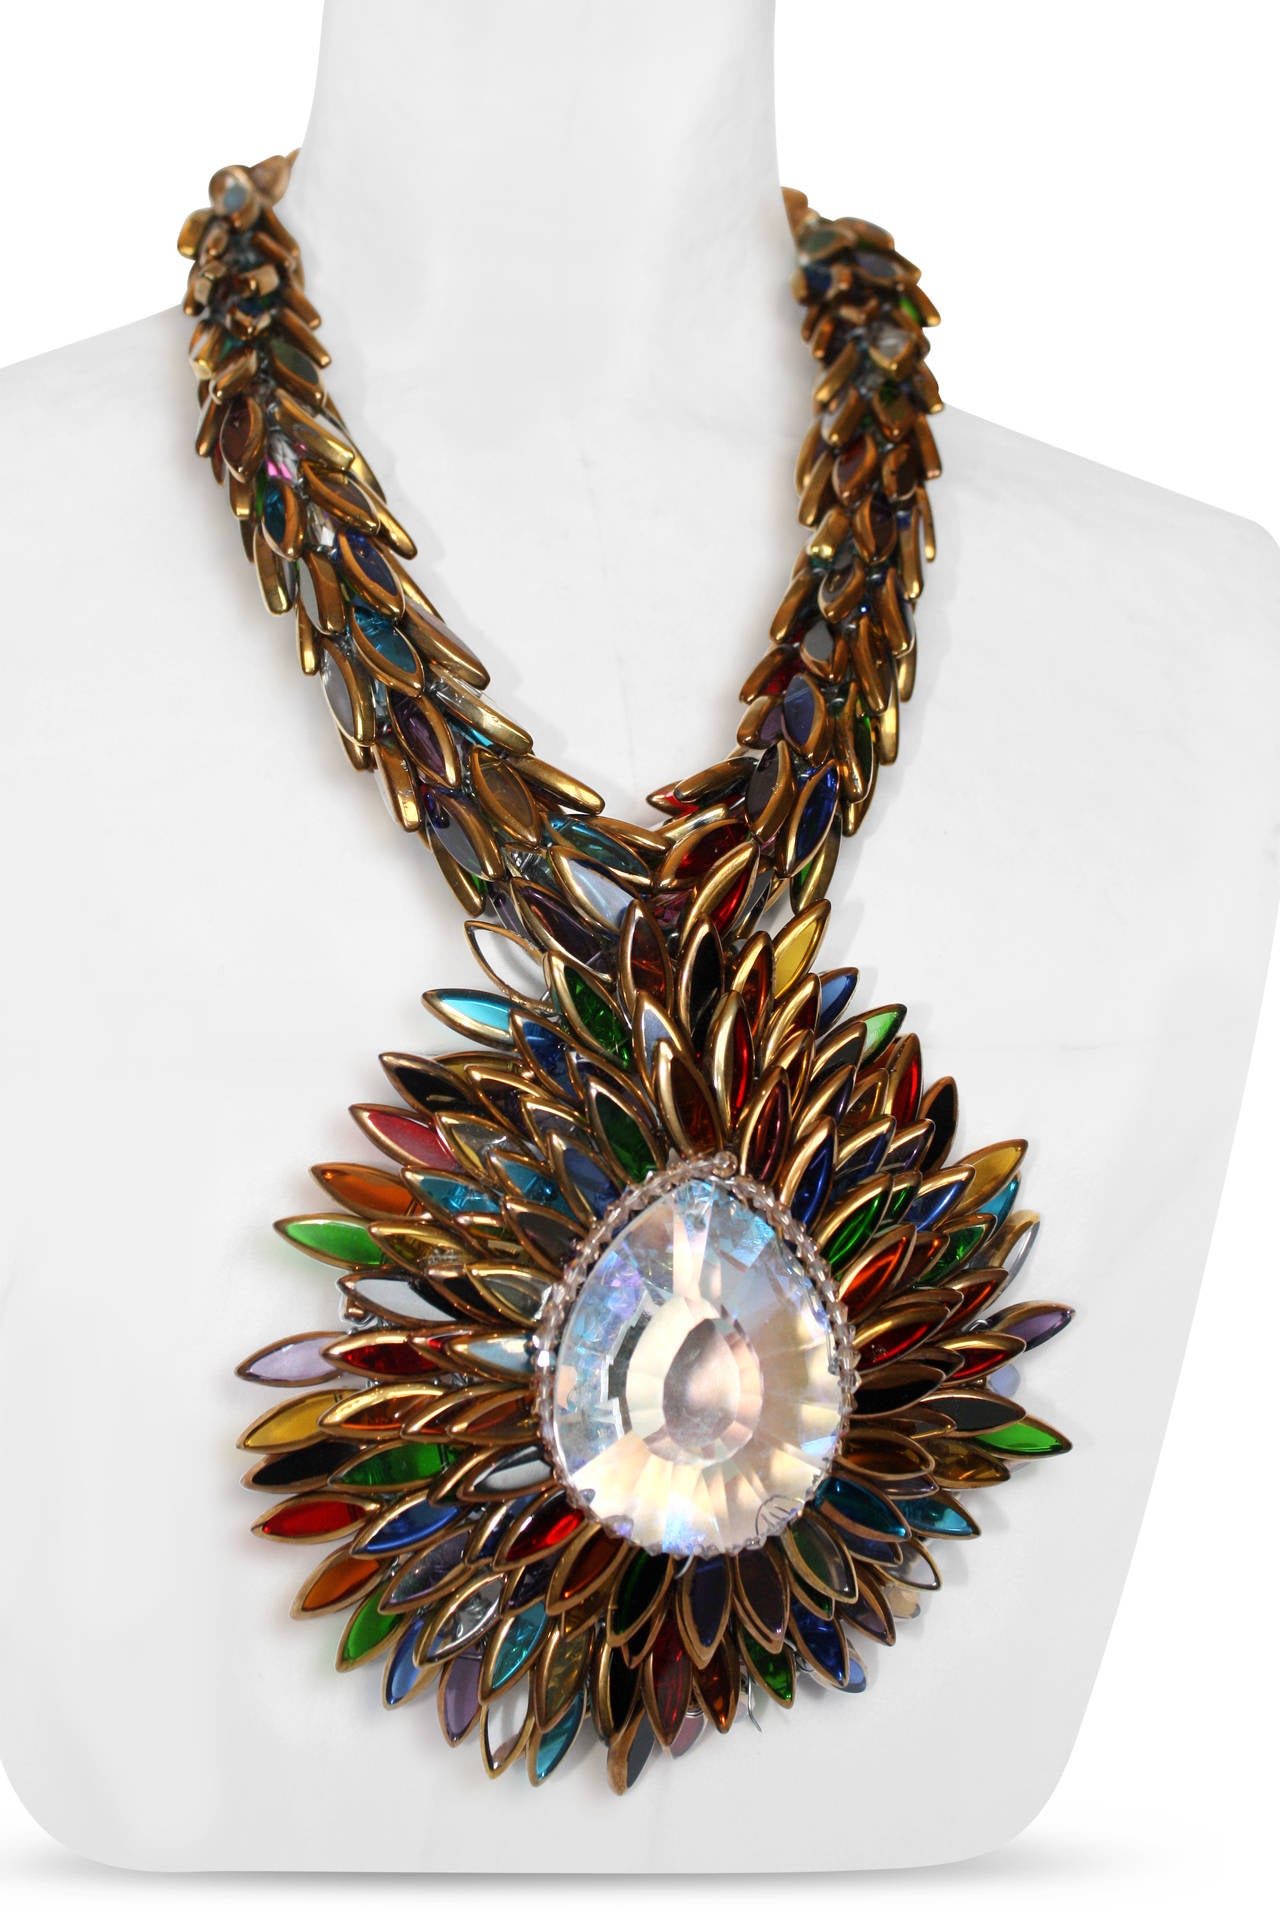 This Vilaiwan Fine Jewelry custom made multi tone oversized glass necklace is for the true statement-maker. 

Designer Biography:

Vilaiwan Fine Jewelry is the work of creative artist and designer Joe Polthakorn Viboonviriyawong, a